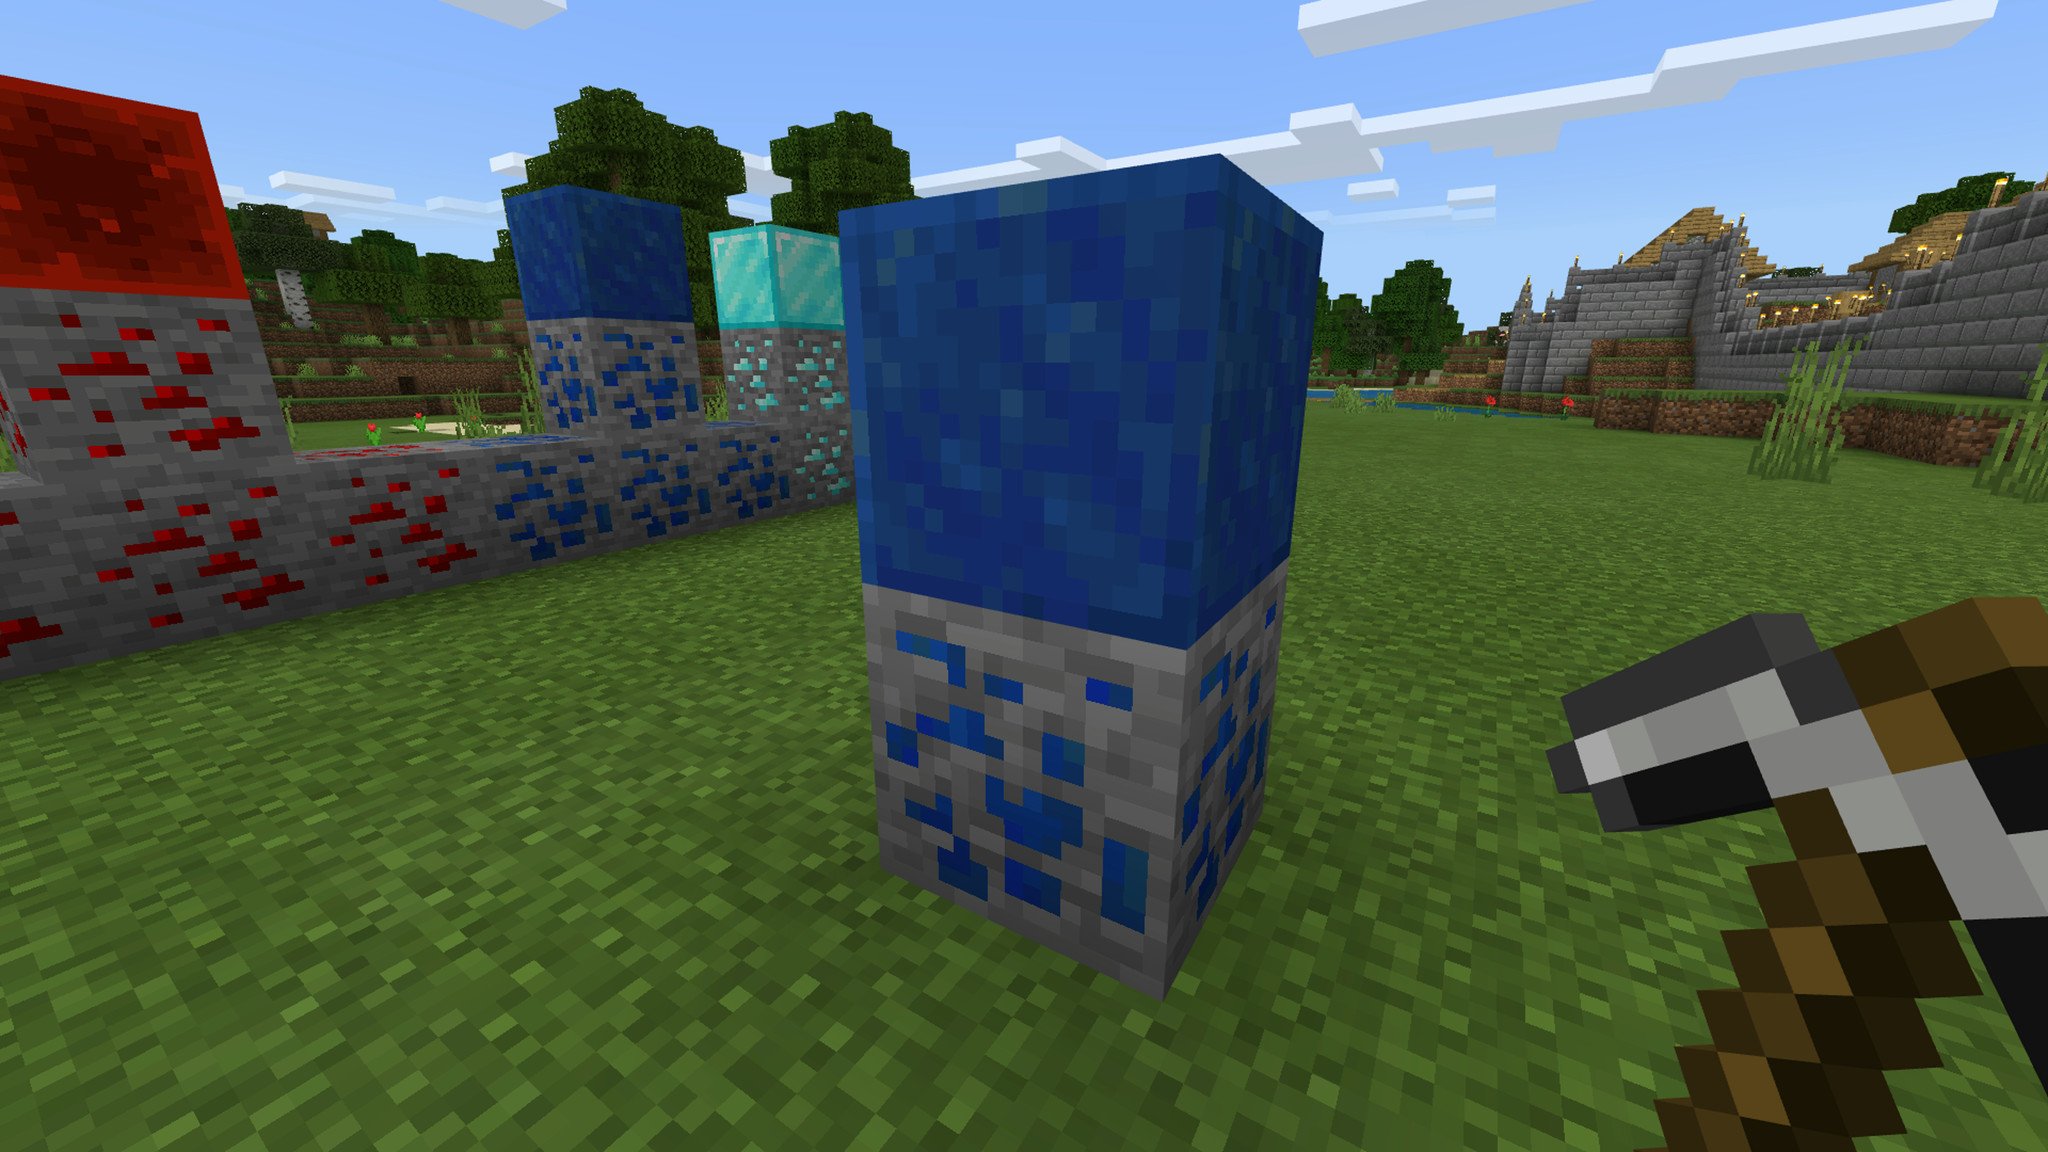 Some lapis ore and a lapis block